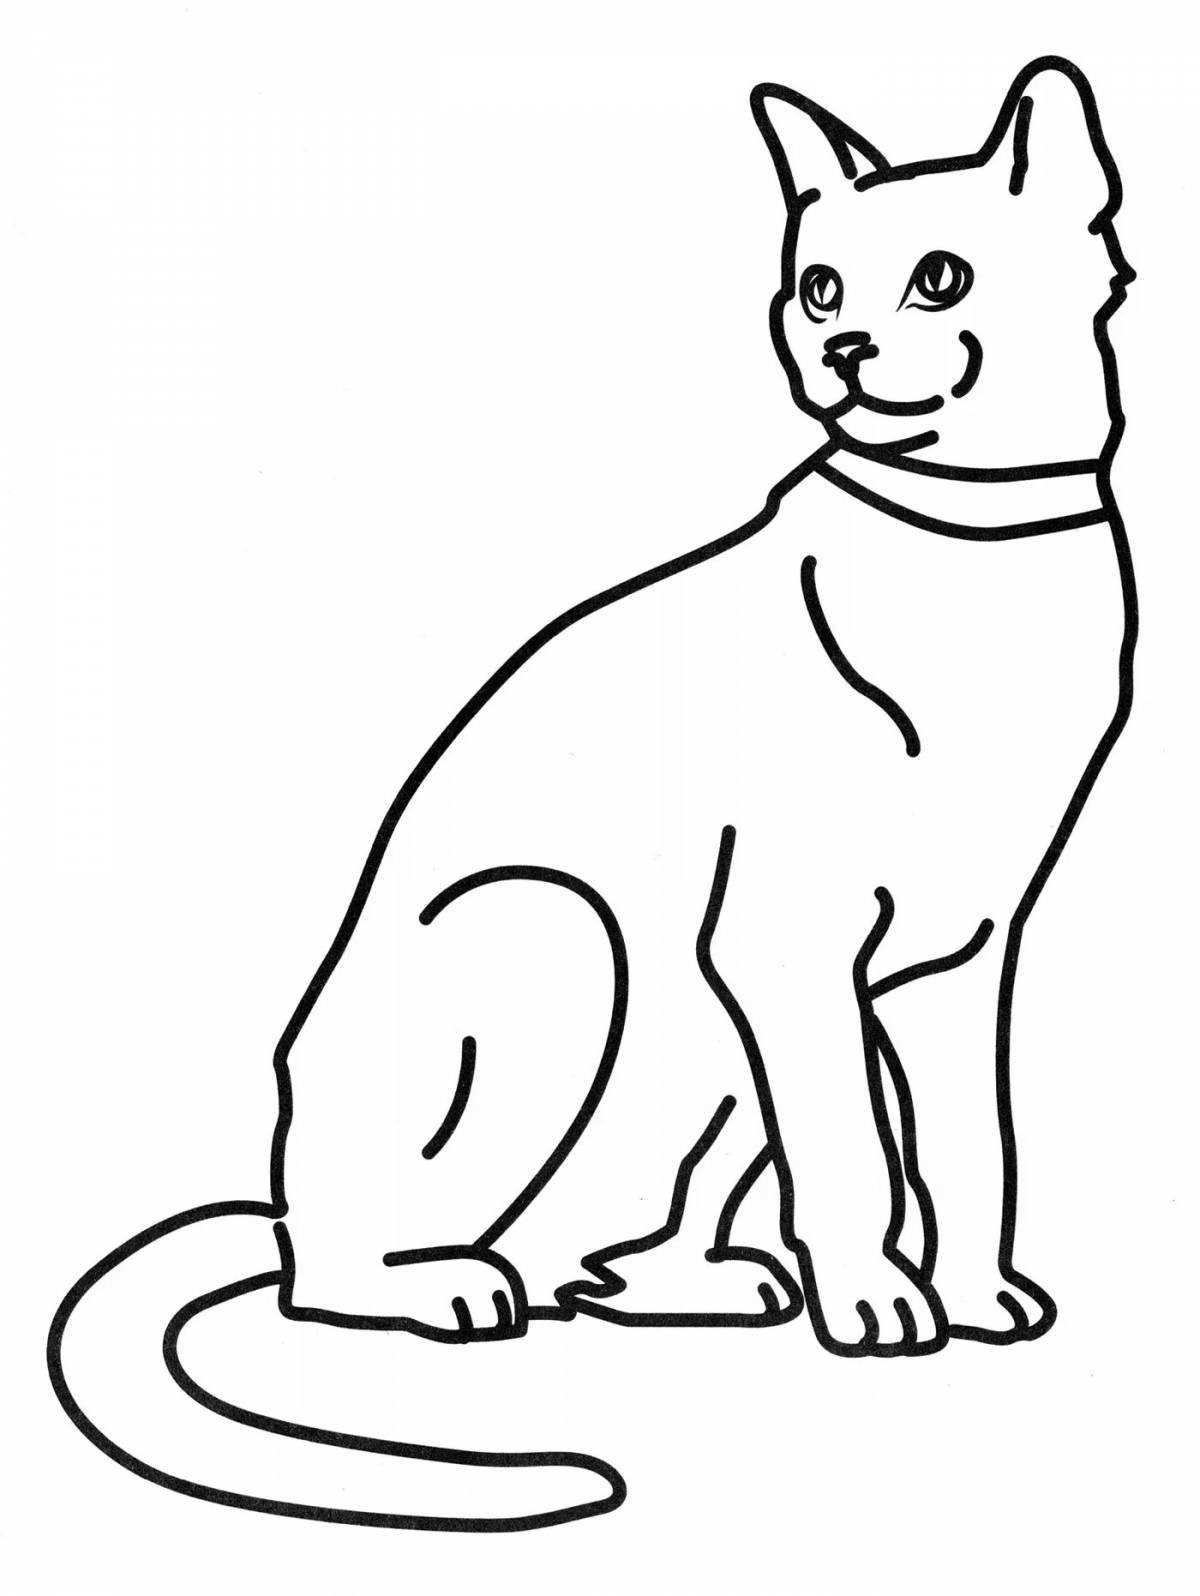 Soft real cat coloring book